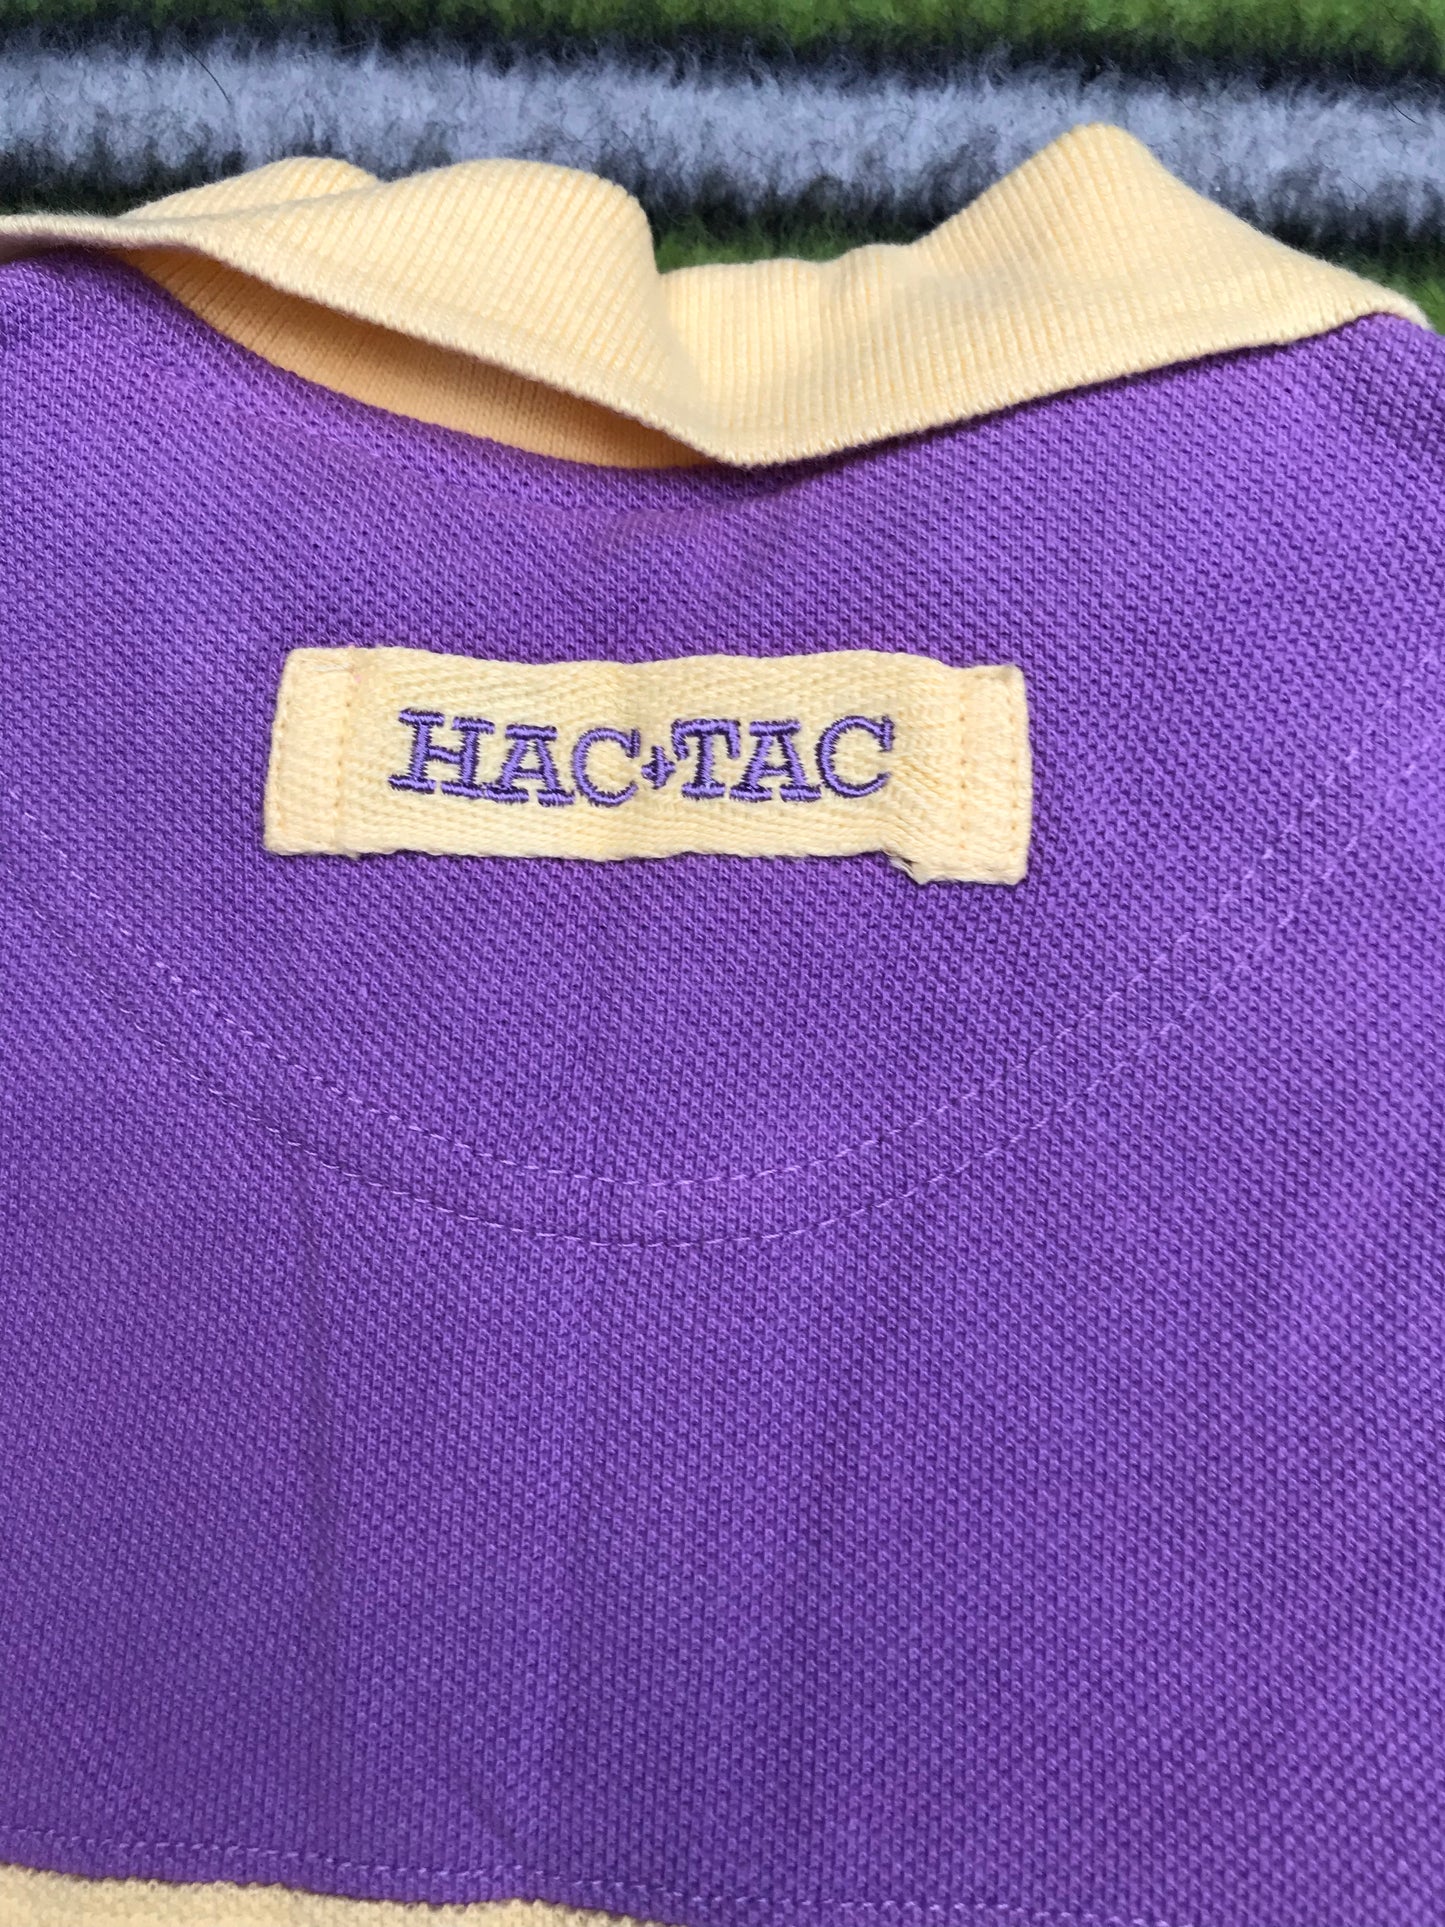 Hav-Tac polo t-shirt yellow and purple size XS(4) FREE POSTAGE